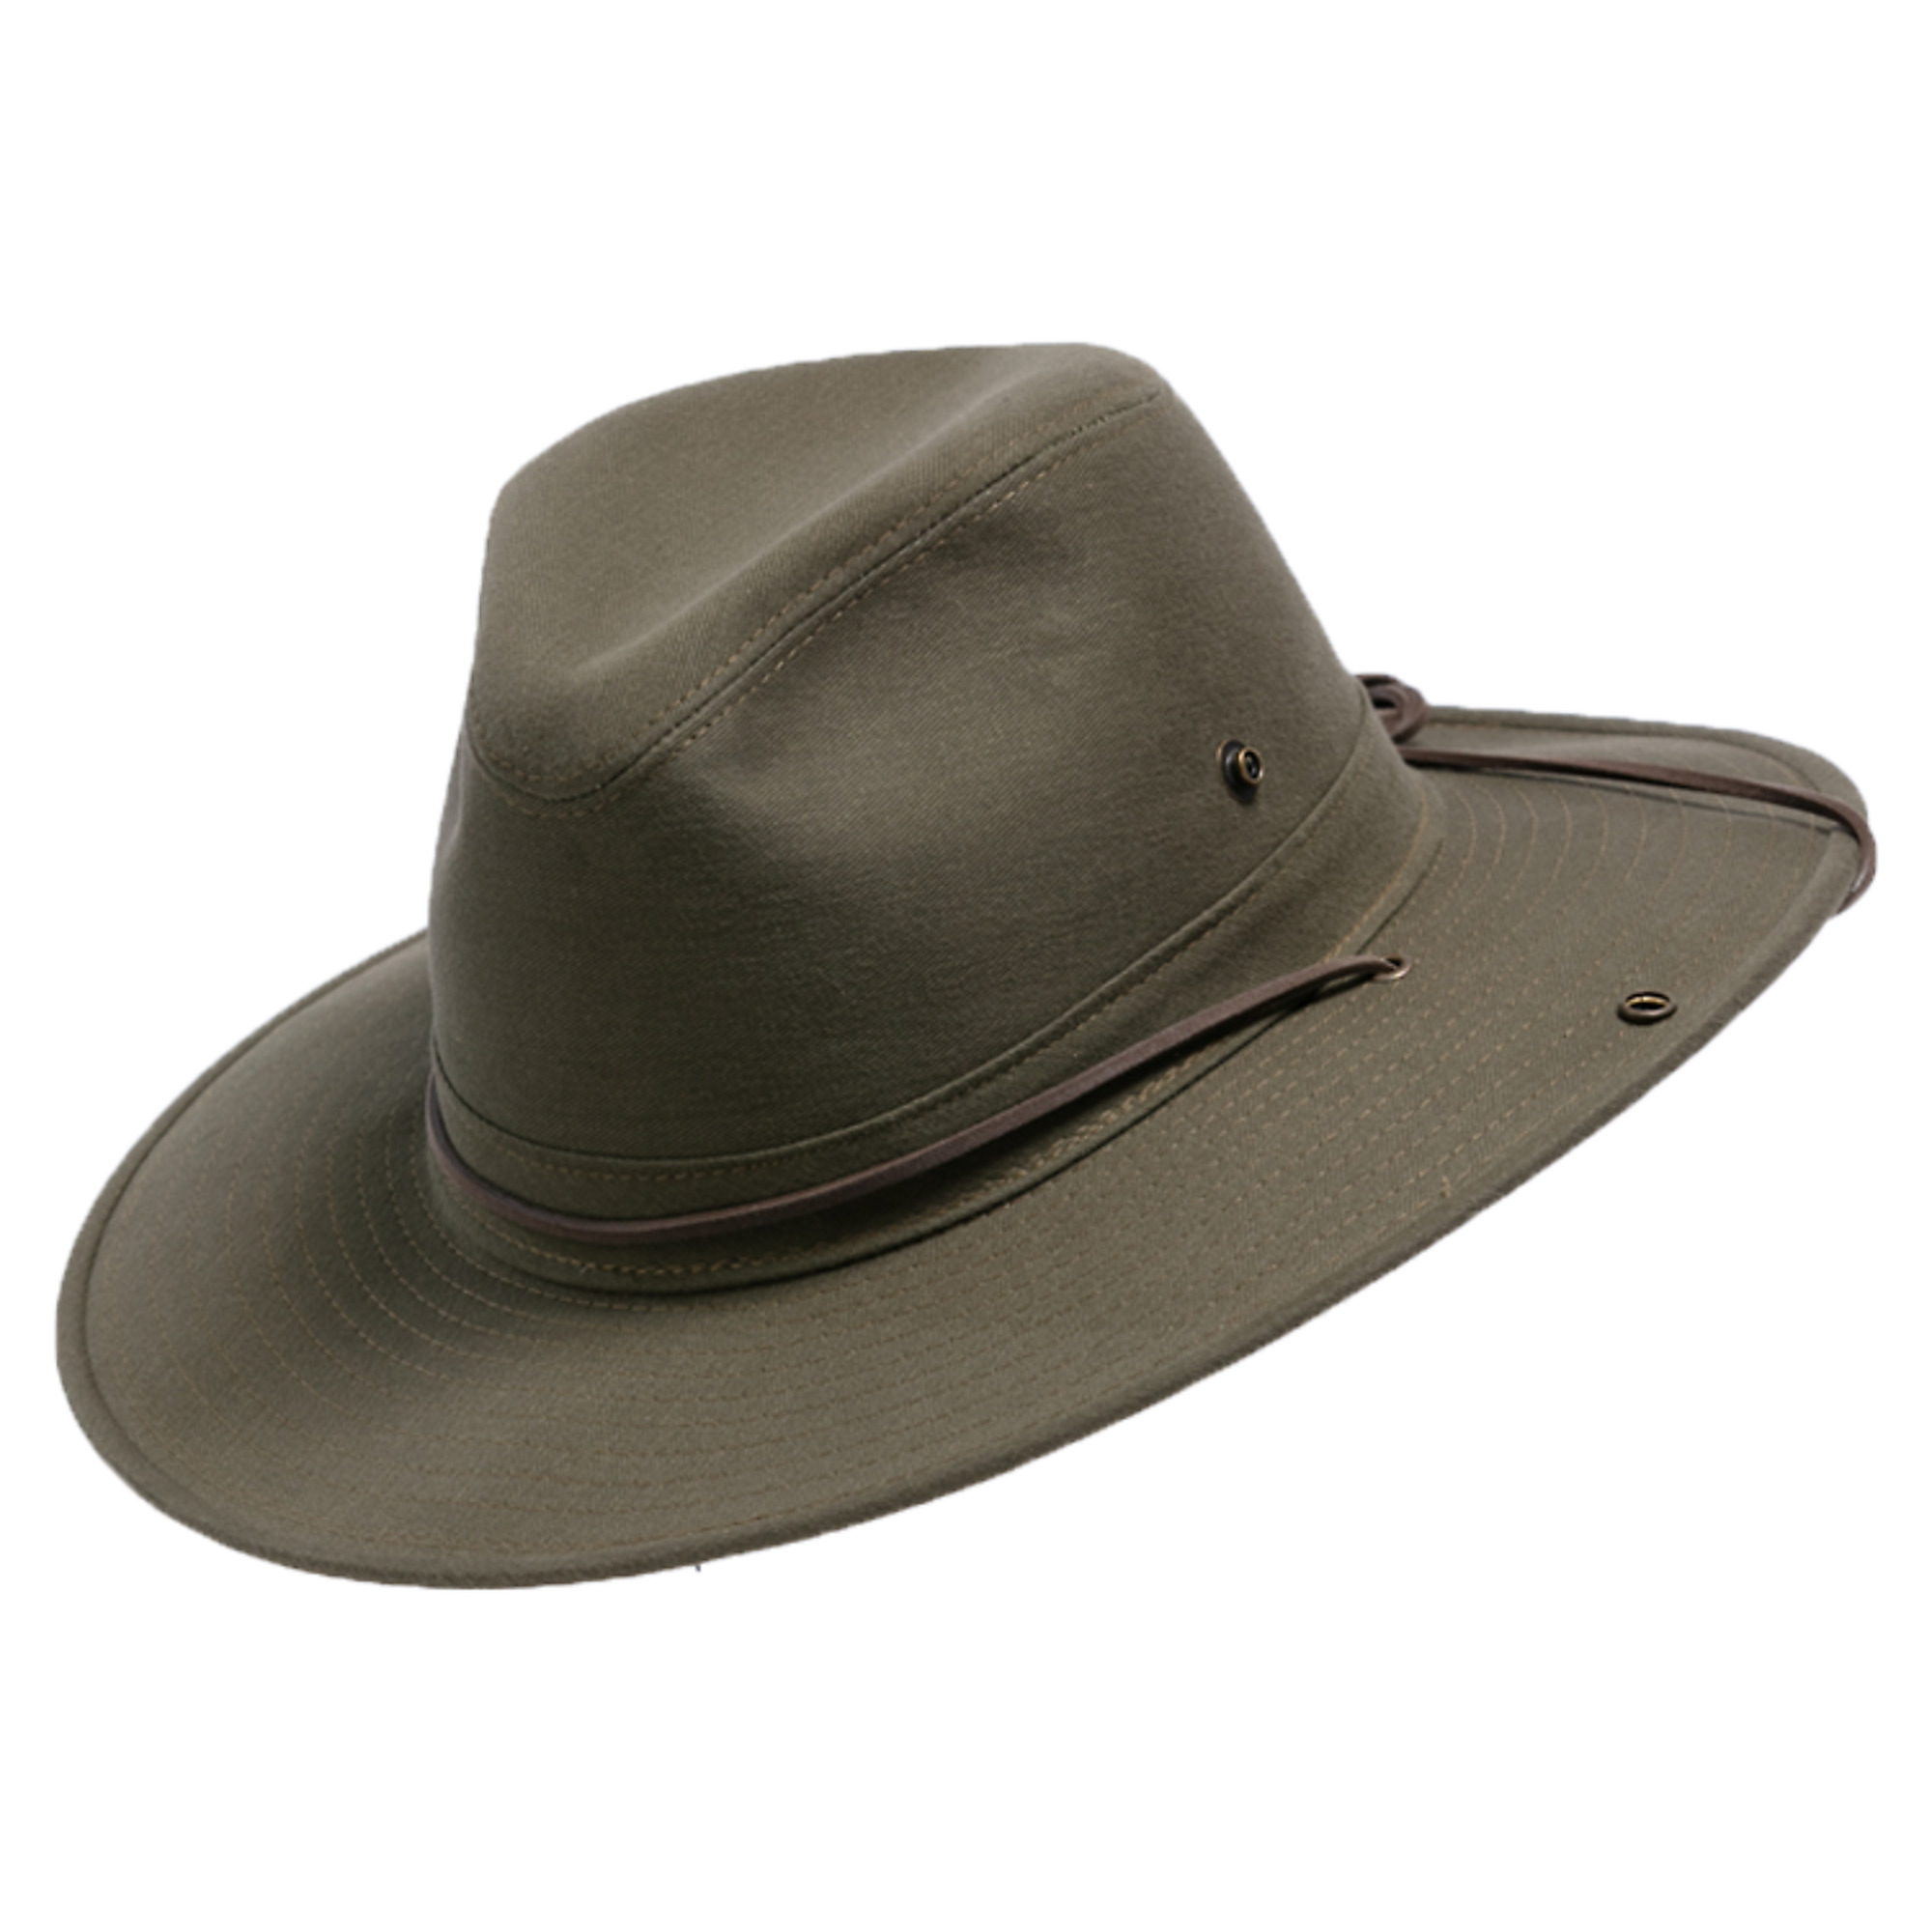 Henschel Hat Company, Olive Oswego Outdoor Hat, Size S, Color Olive, Hat Style Hat, Model 5336-36S